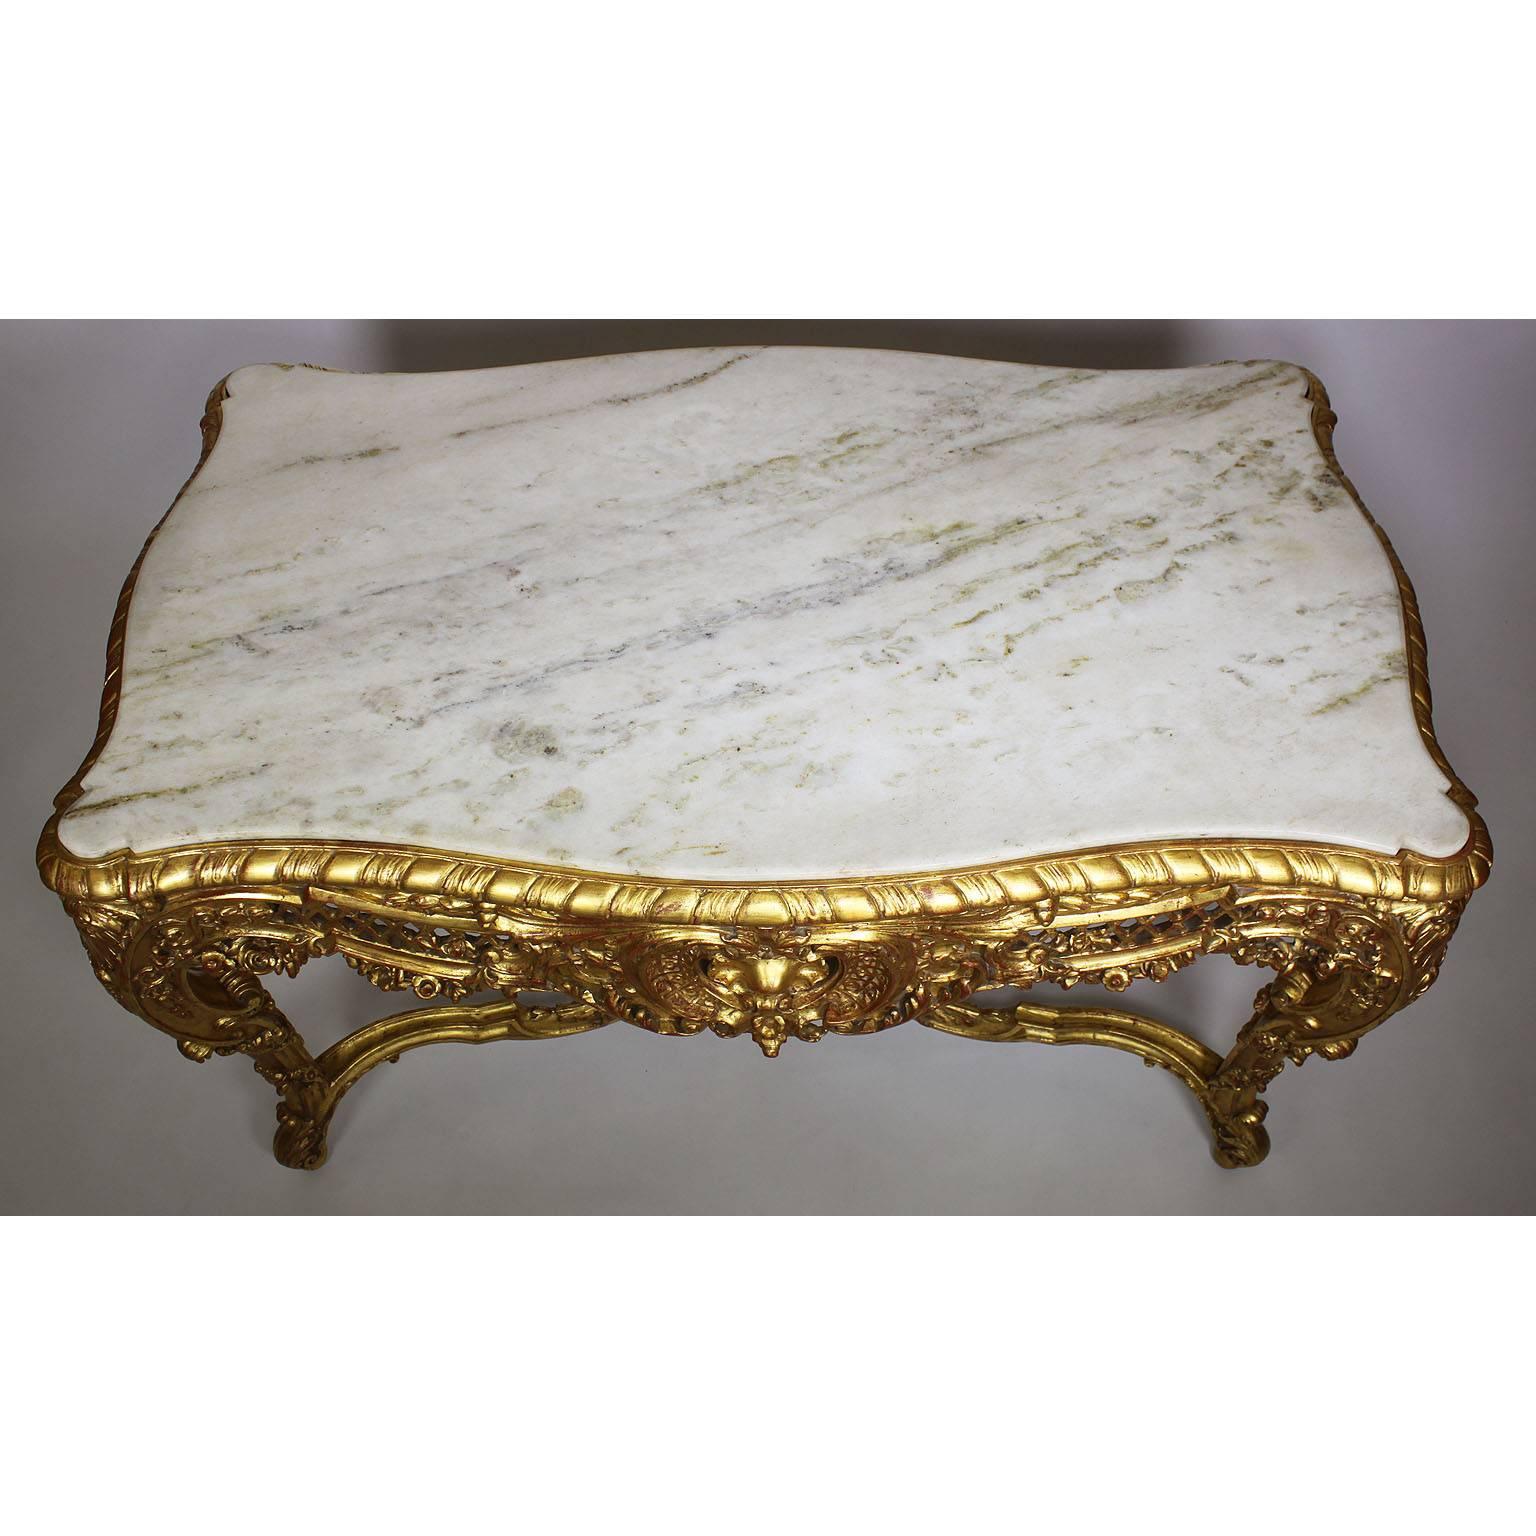 French Belle Époque 19th-20th Century Giltwood Carved Rococo Center Hall Table For Sale 2